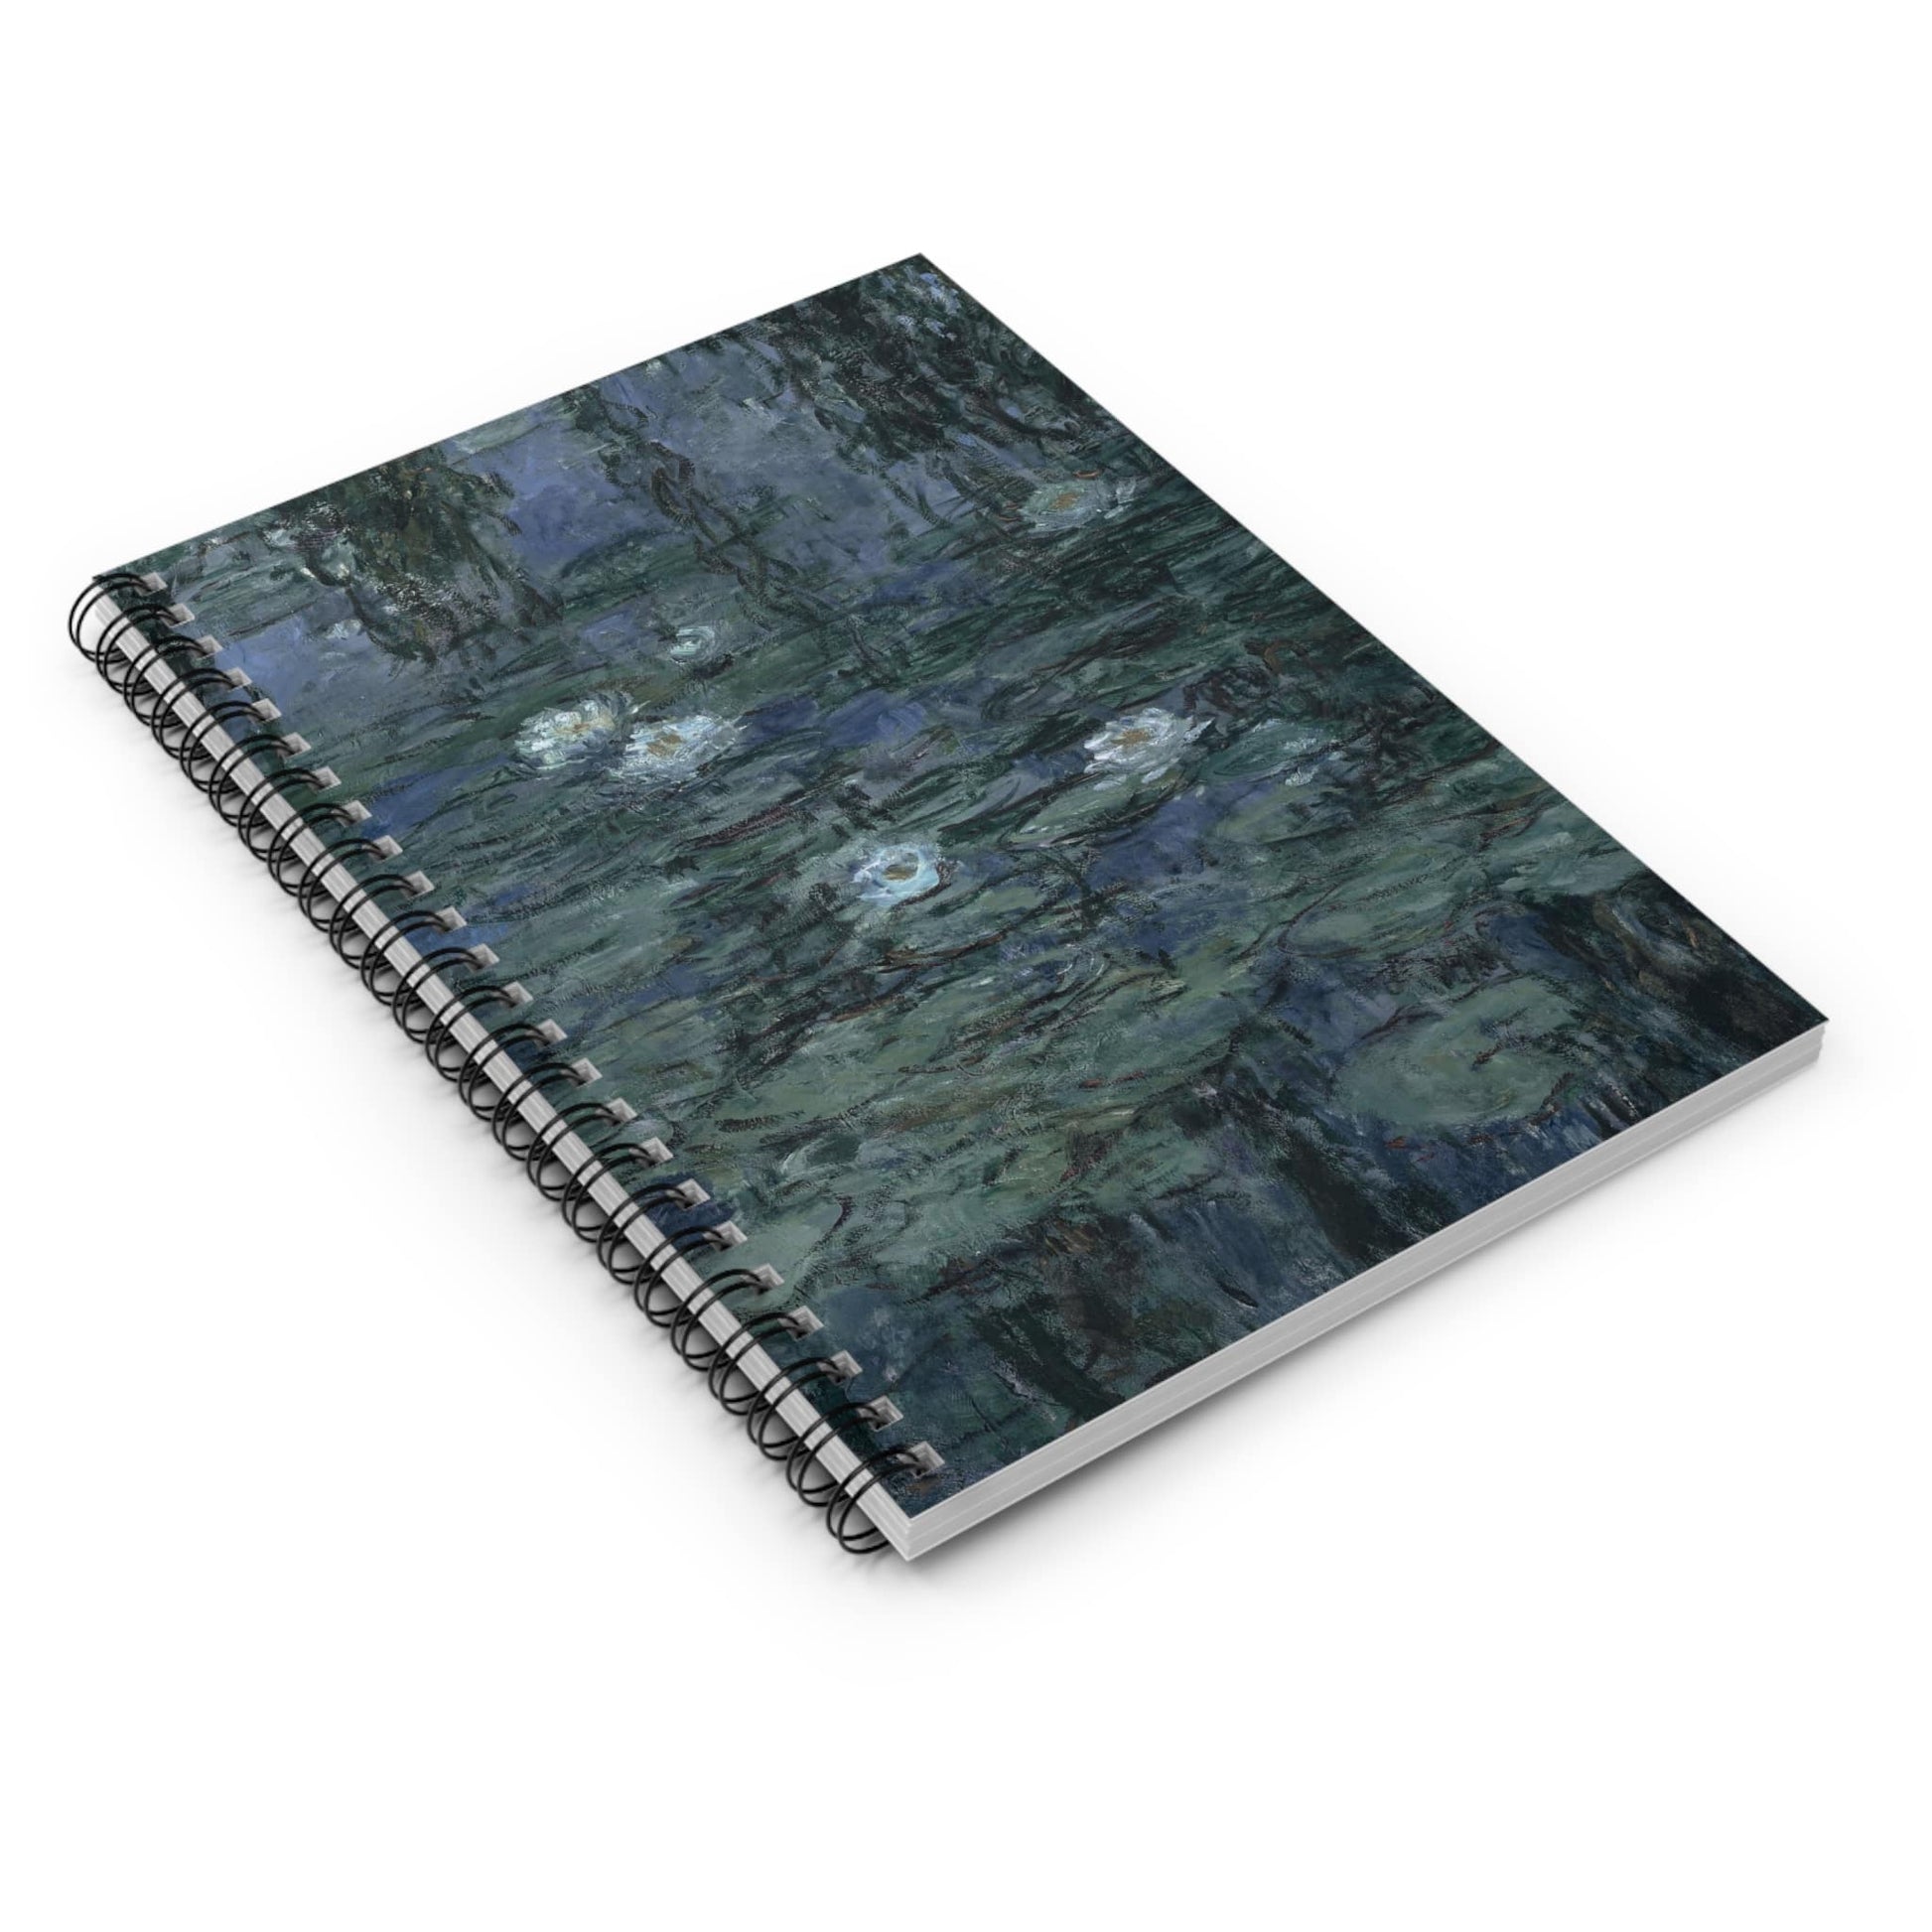 Deep Blue and Green Spiral Notebook Laying Flat on White Surface